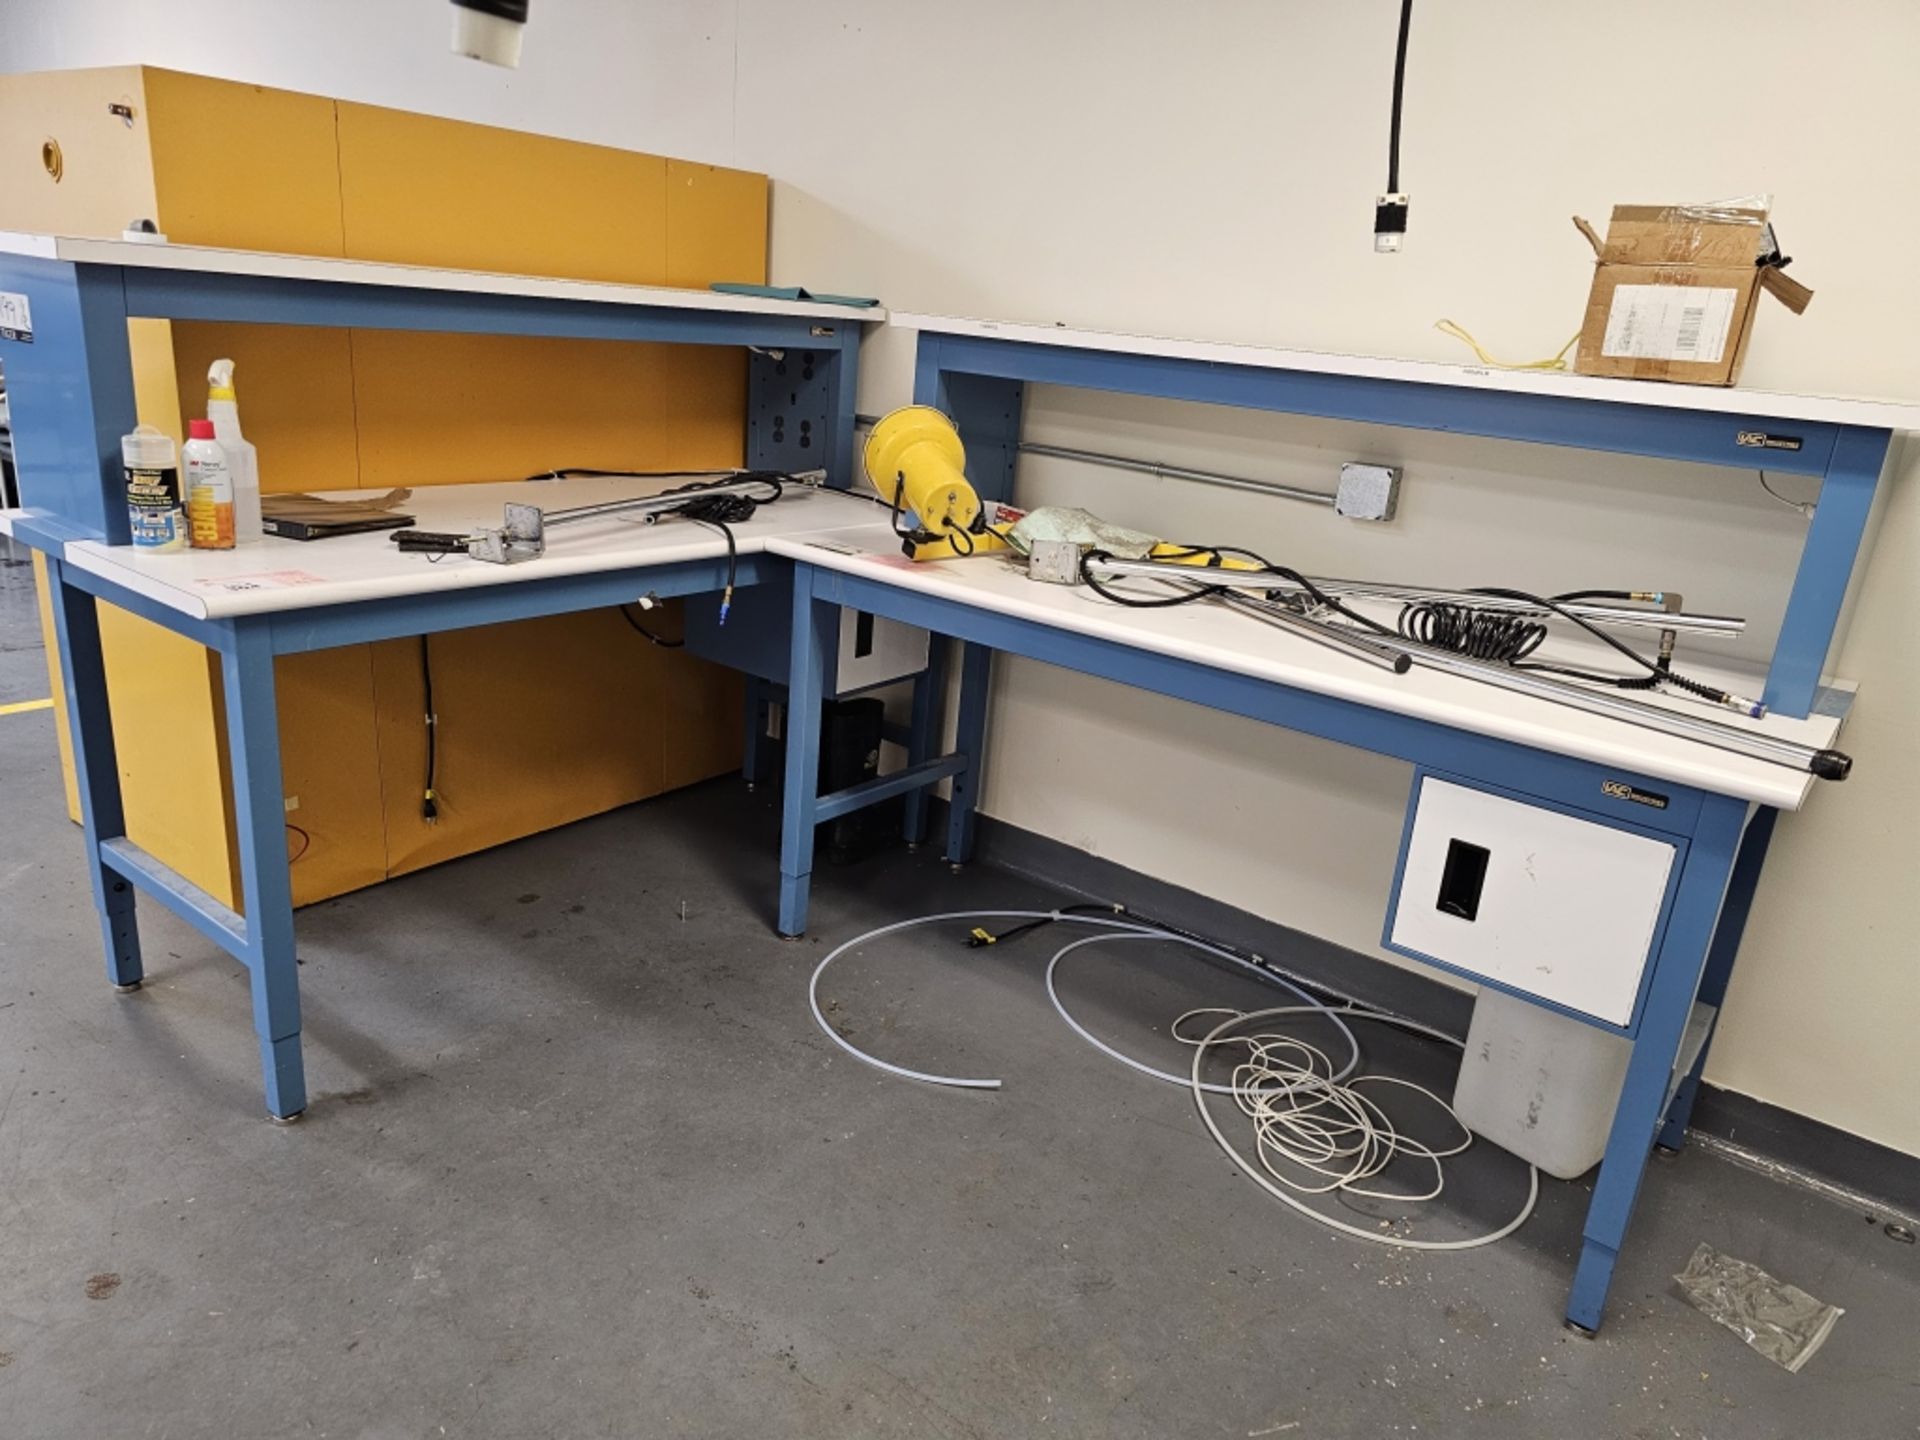 (2) IAC Workbenches and Contents